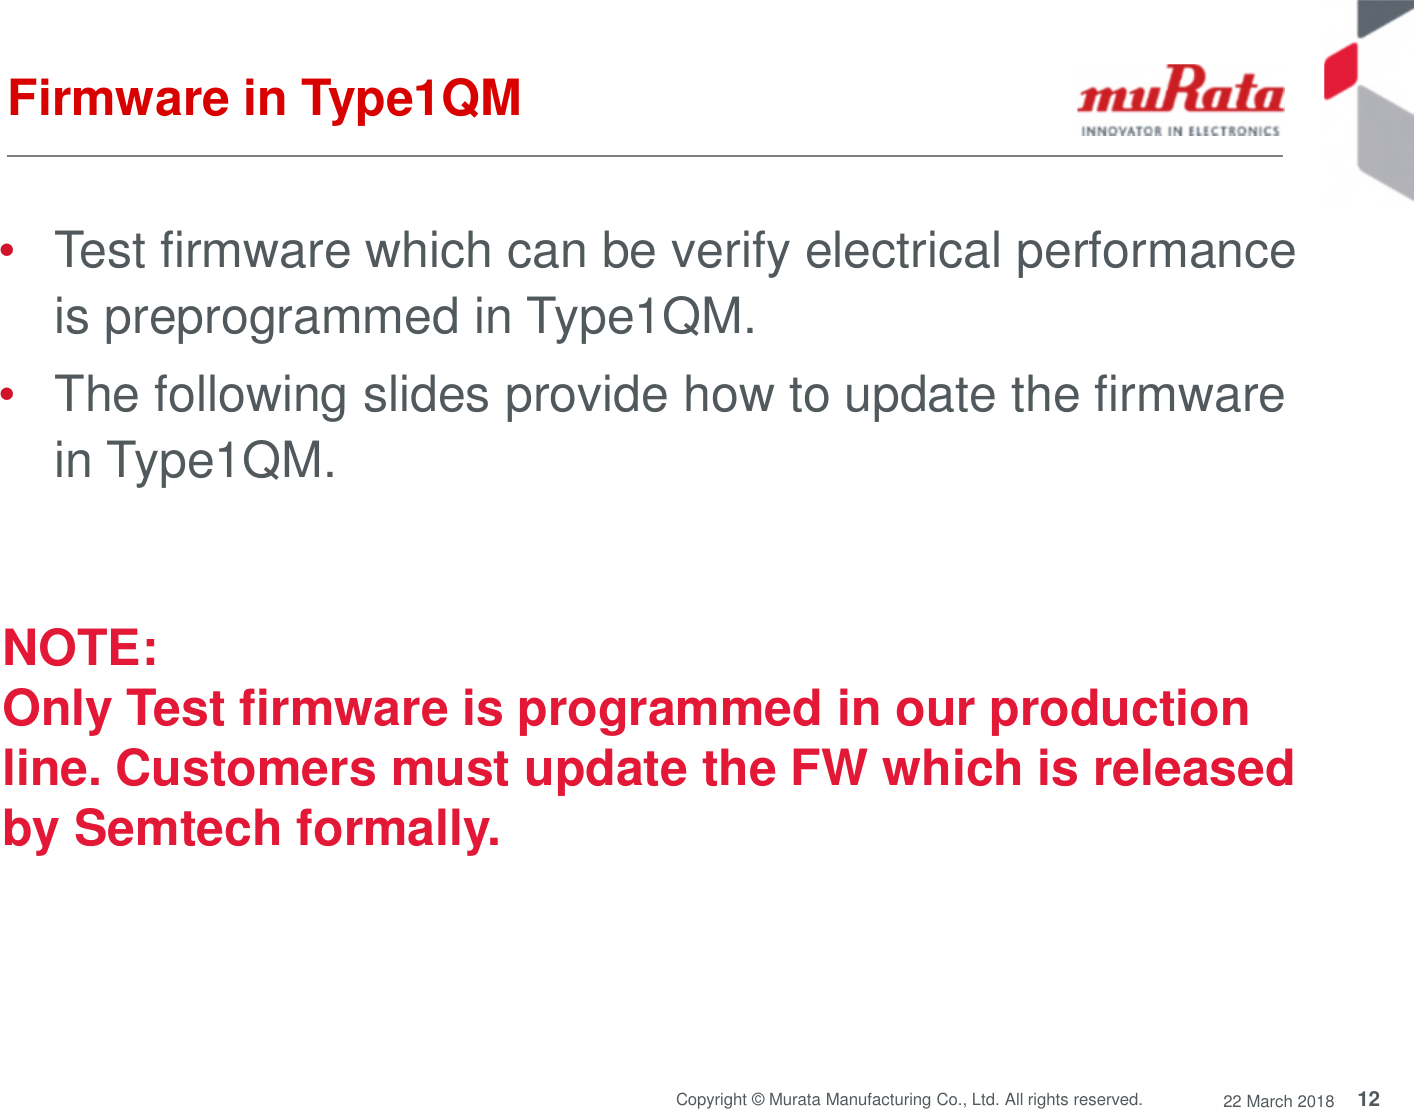 12Copyright © Murata Manufacturing Co., Ltd. All rights reserved. 22 March 2018Firmware in Type1QM•Test firmware which can be verify electrical performanceis preprogrammed in Type1QM.•The following slides provide how to update the firmwarein Type1QM.NOTE:Only Test firmware is programmed in our productionline. Customers must update the FW which is releasedby Semtech formally.